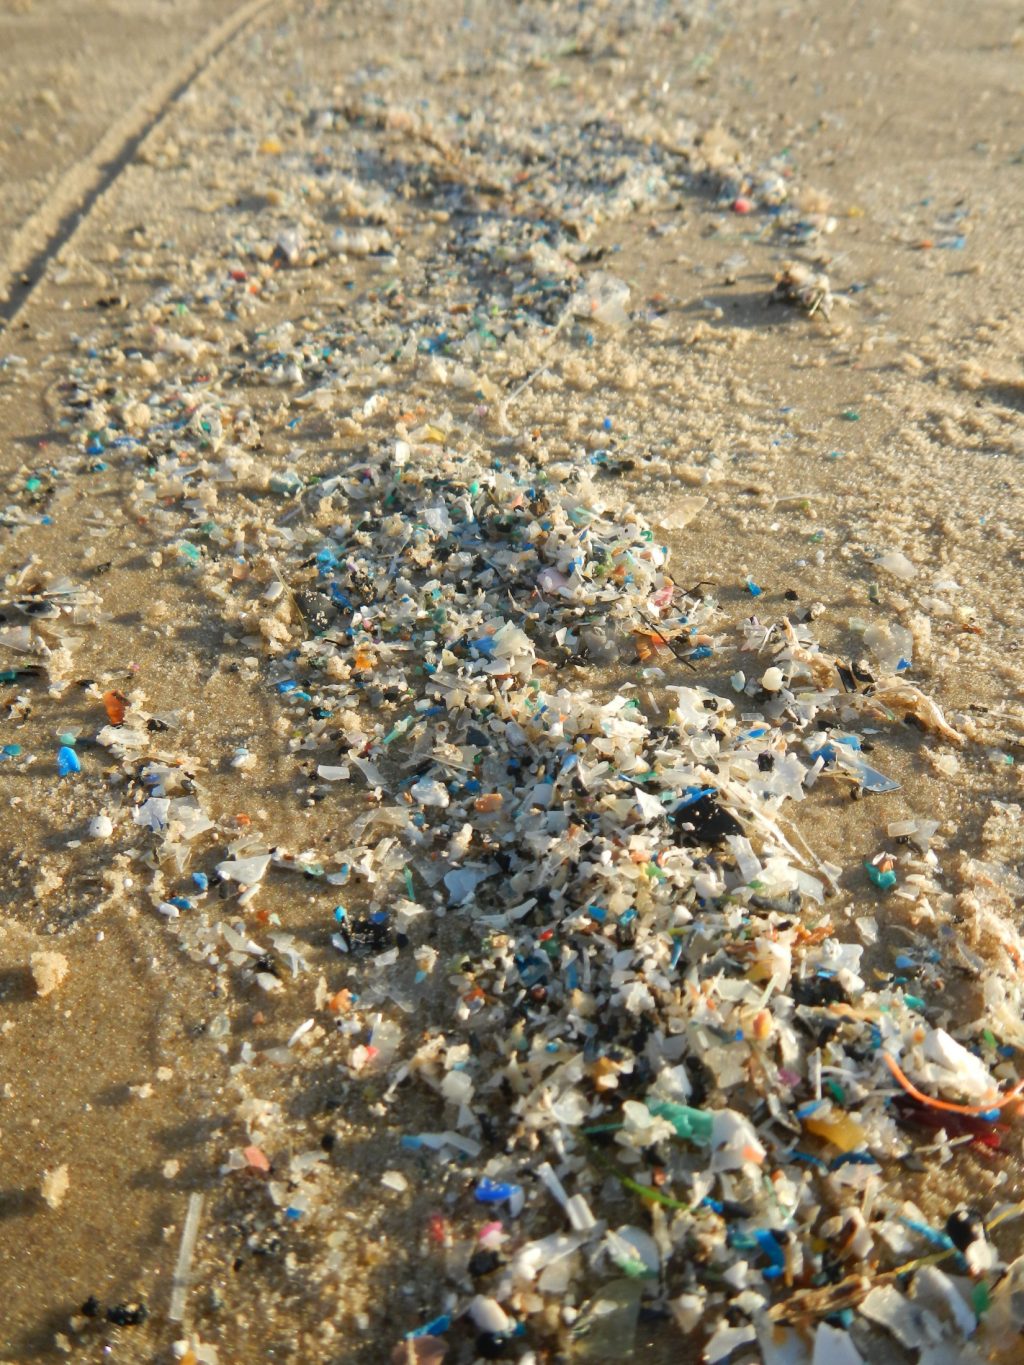 Photo of microplastics washed up on a beach